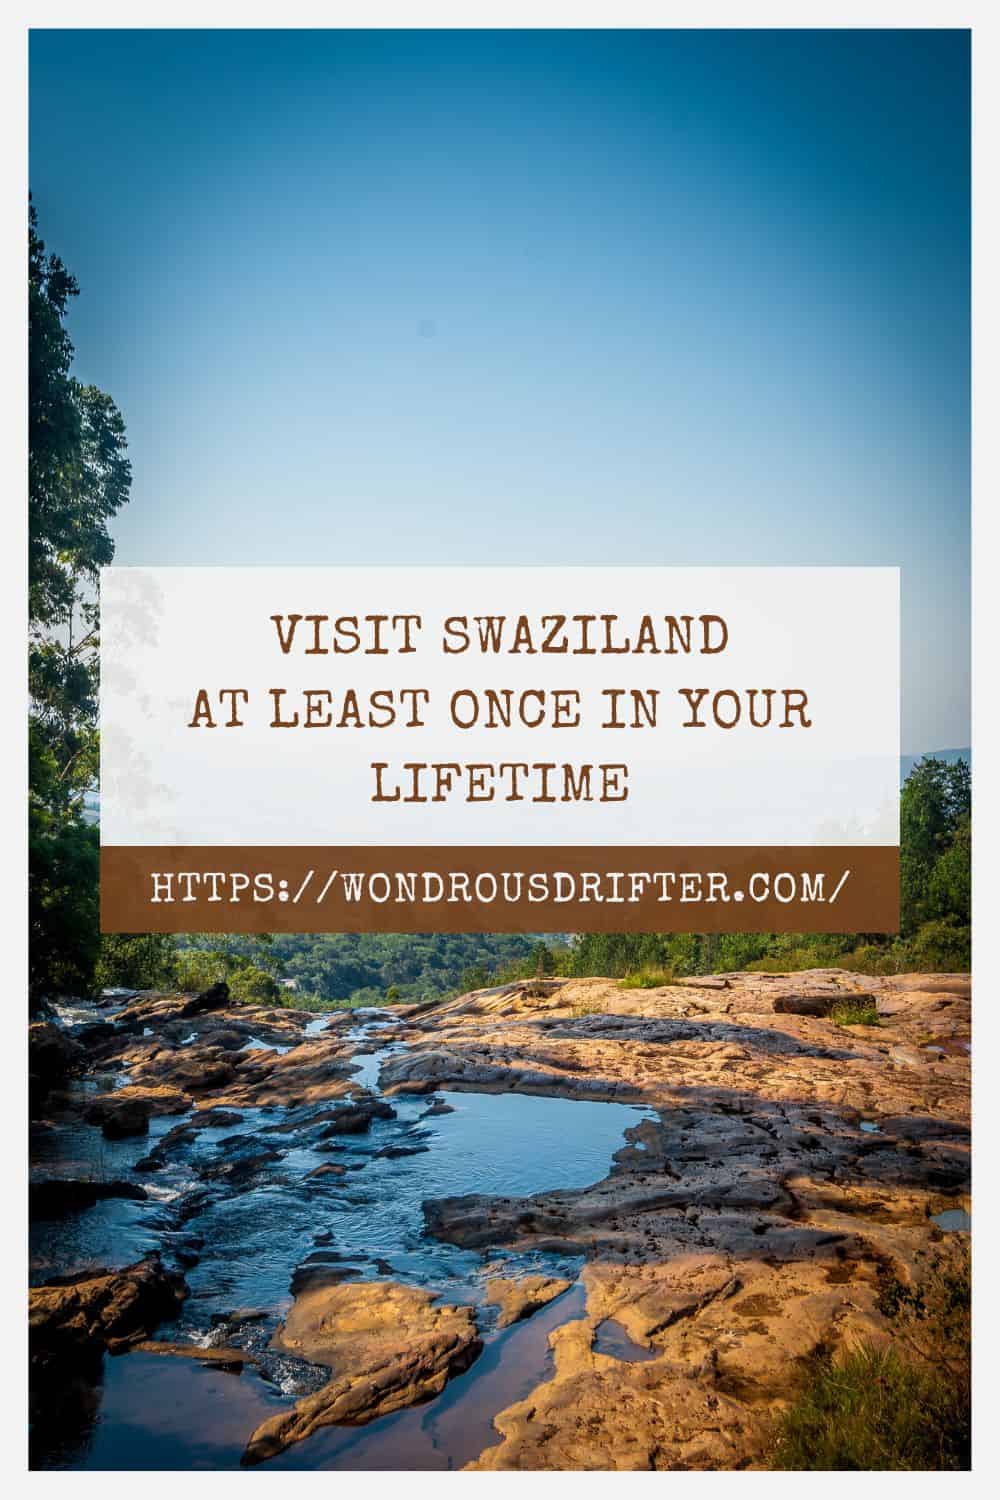 Visit Swaziland at least once in your lifetime